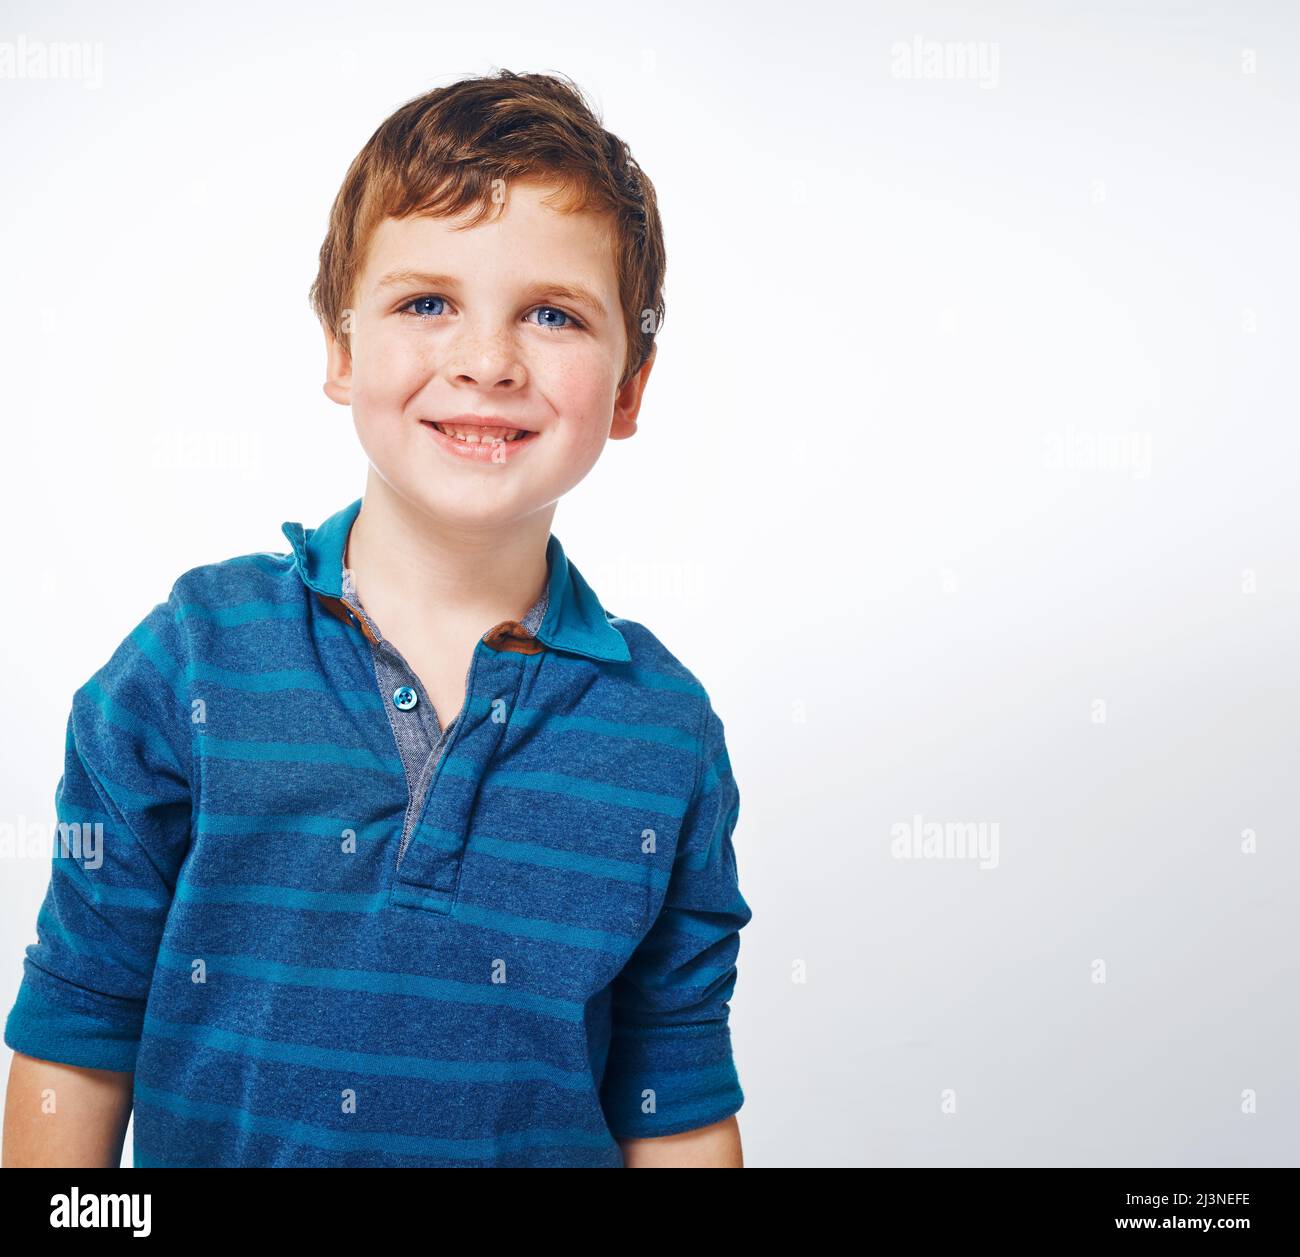 His smile is just adorable. Studio shot of a young kid against a grey background. Stock Photo